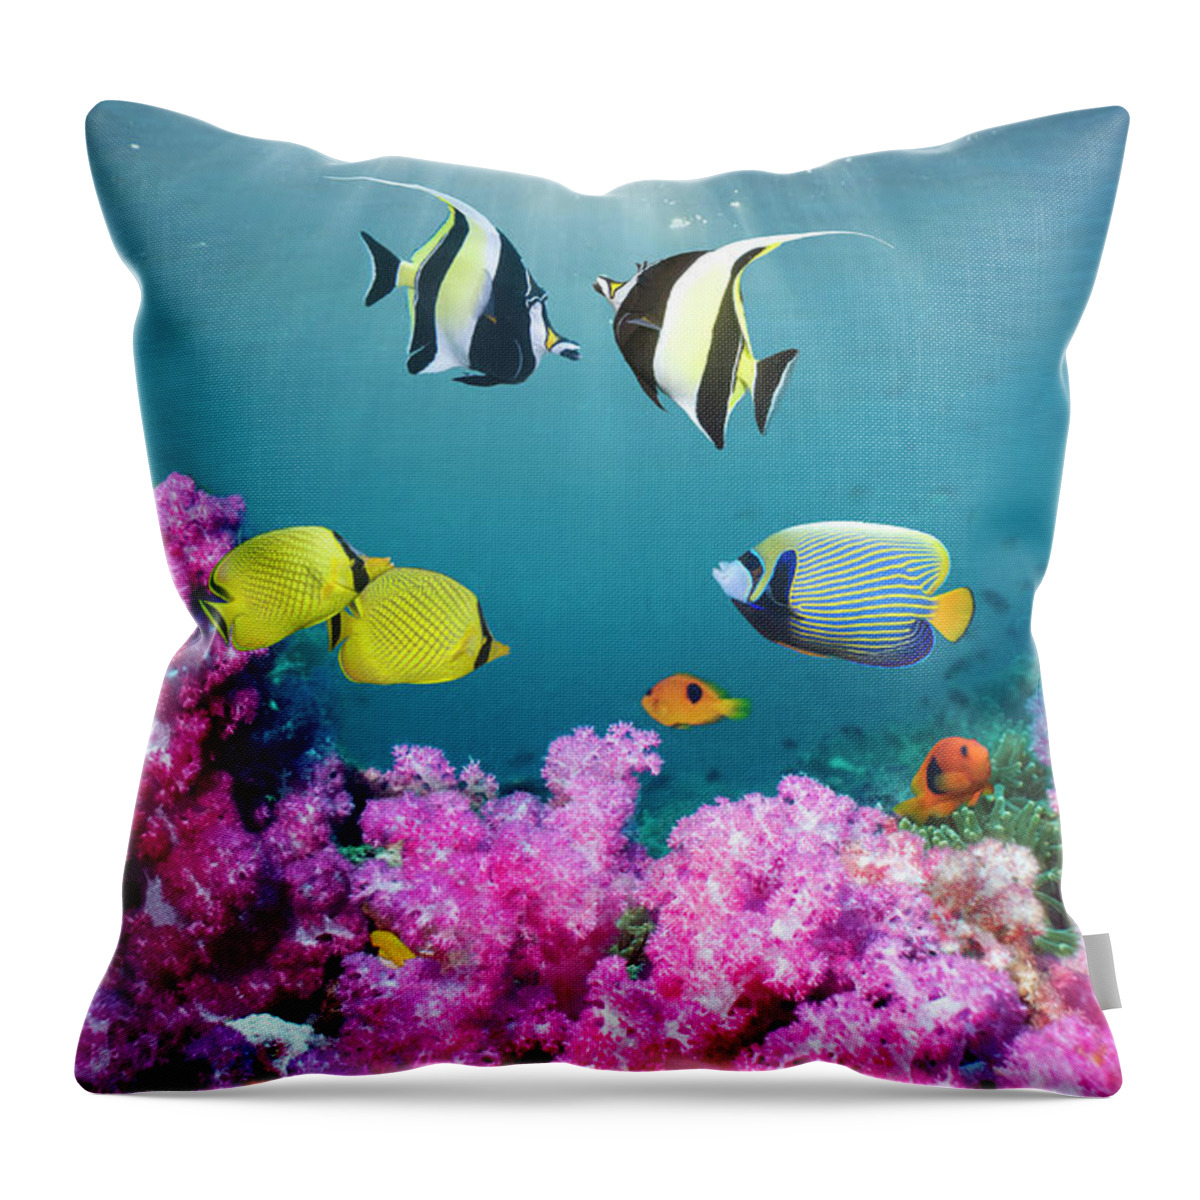 Tranquility Throw Pillow featuring the photograph Tropical Reef Fish Over Soft Corals by Georgette Douwma